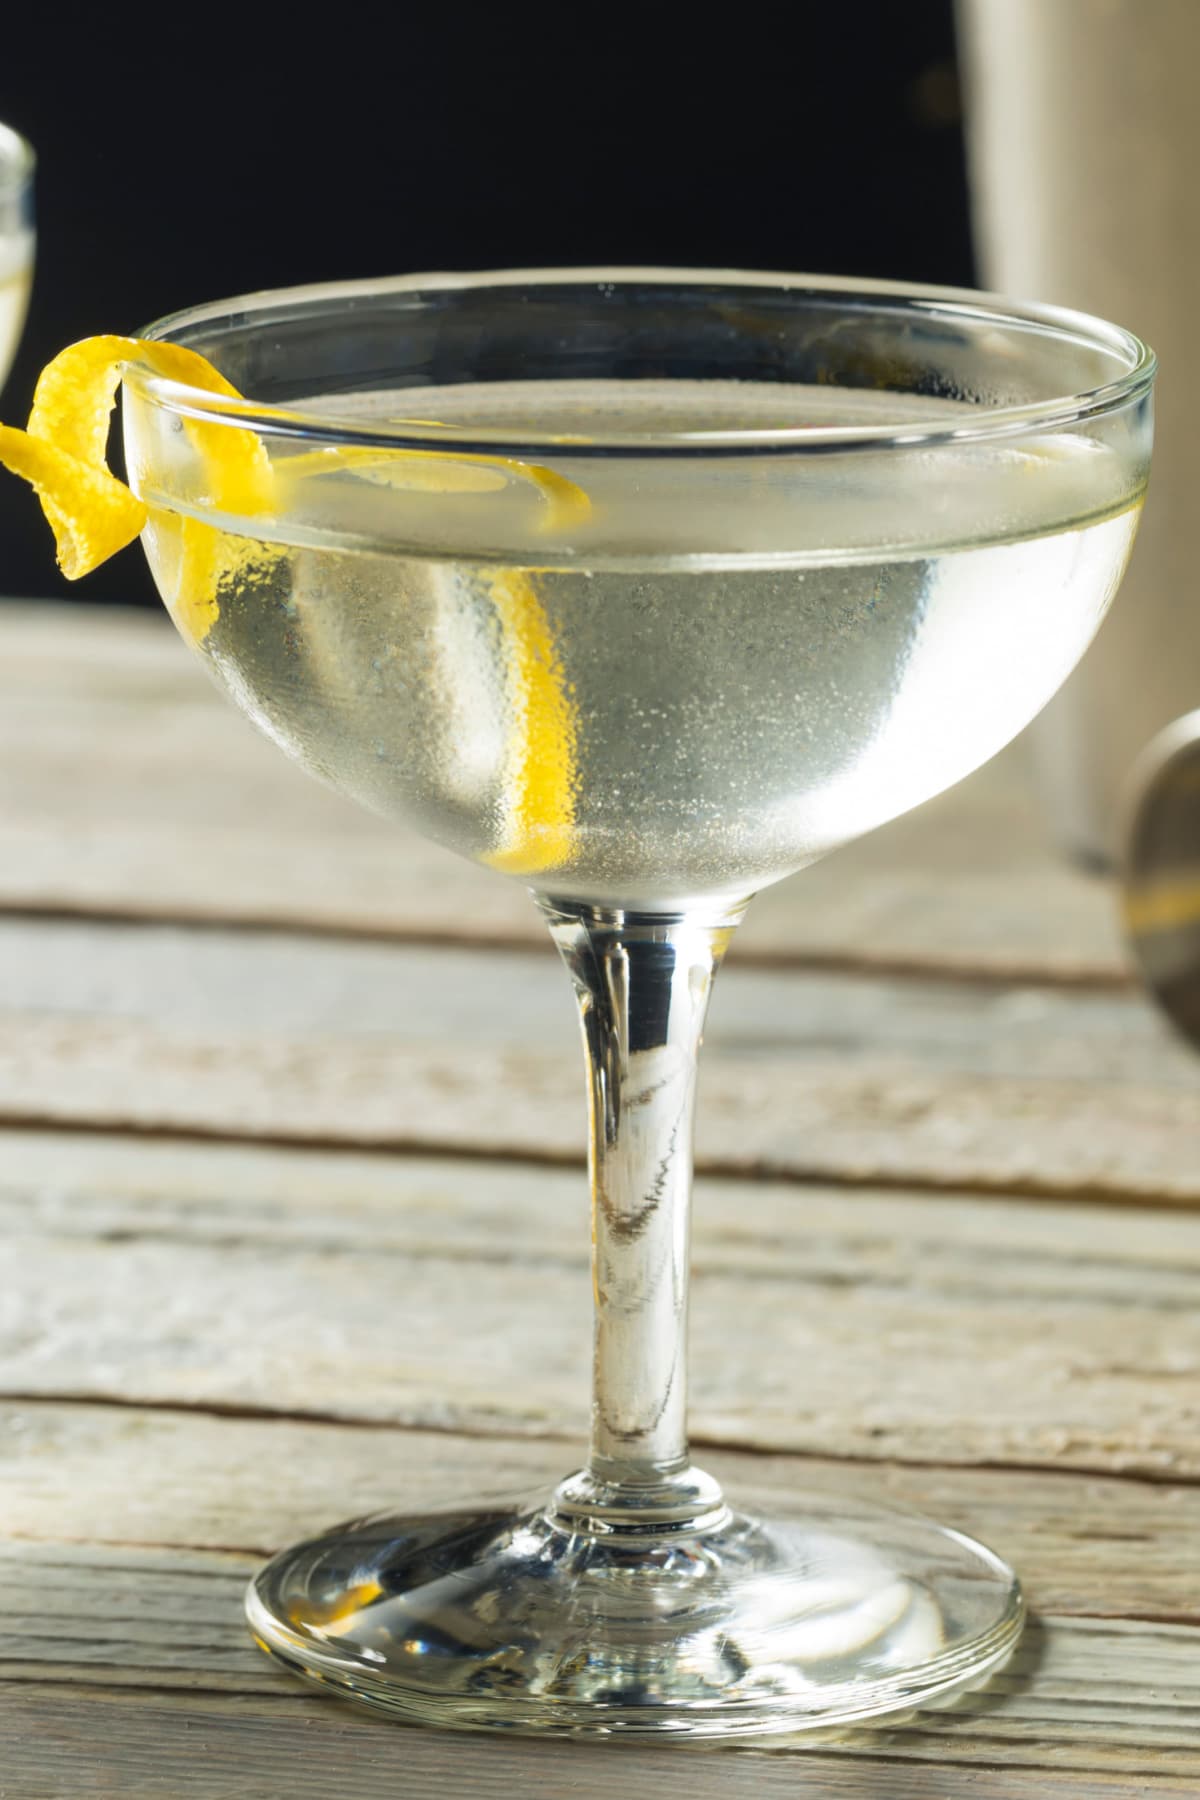 A glass of Vespa Martini on a champagne coupe garnished with lemon peel